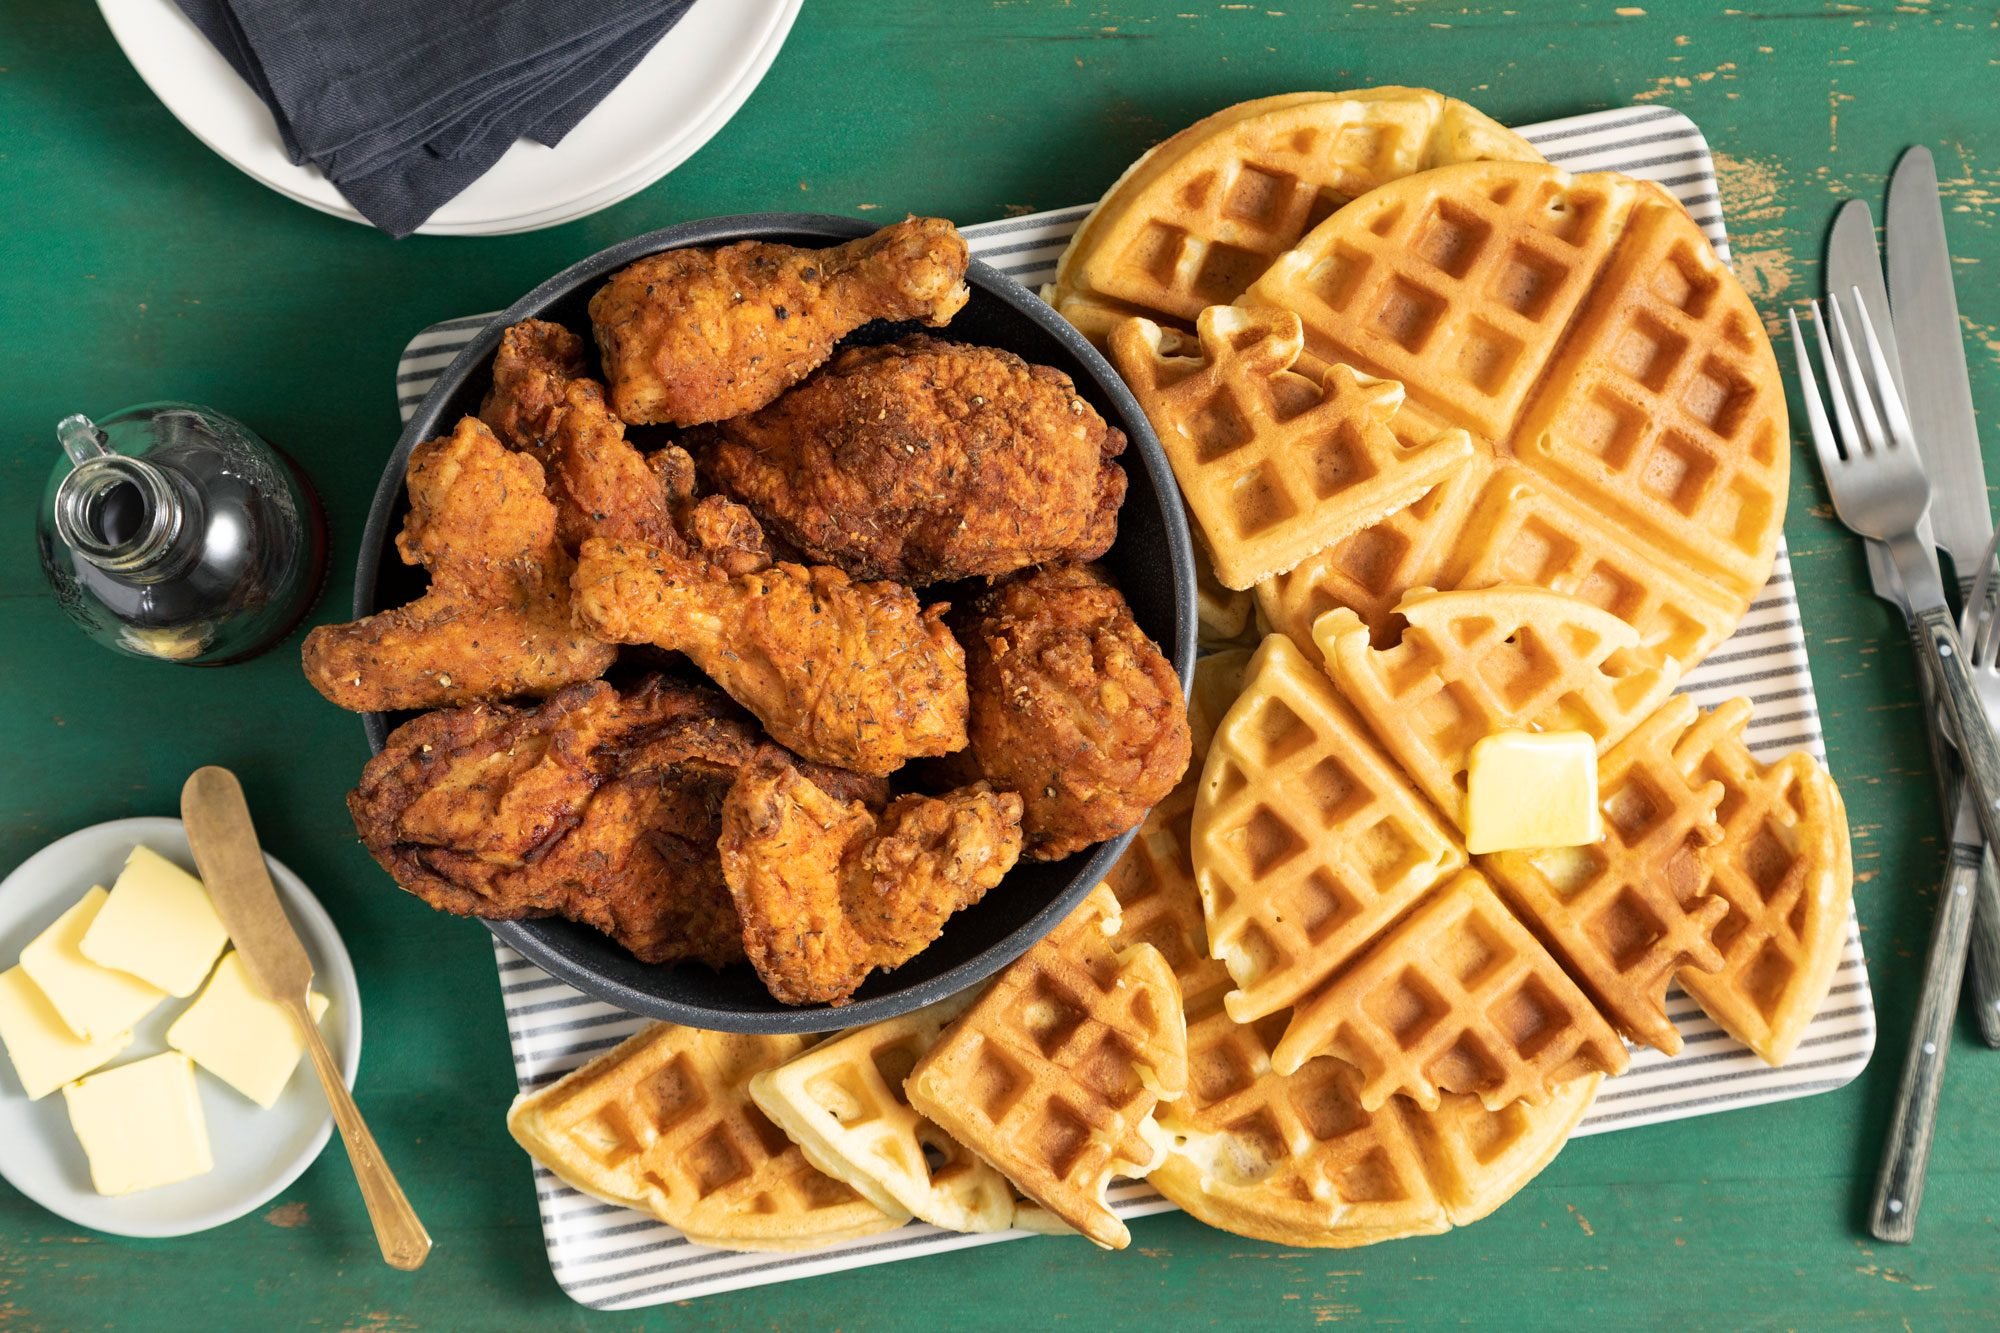 How to Make Fried Chicken and Waffles